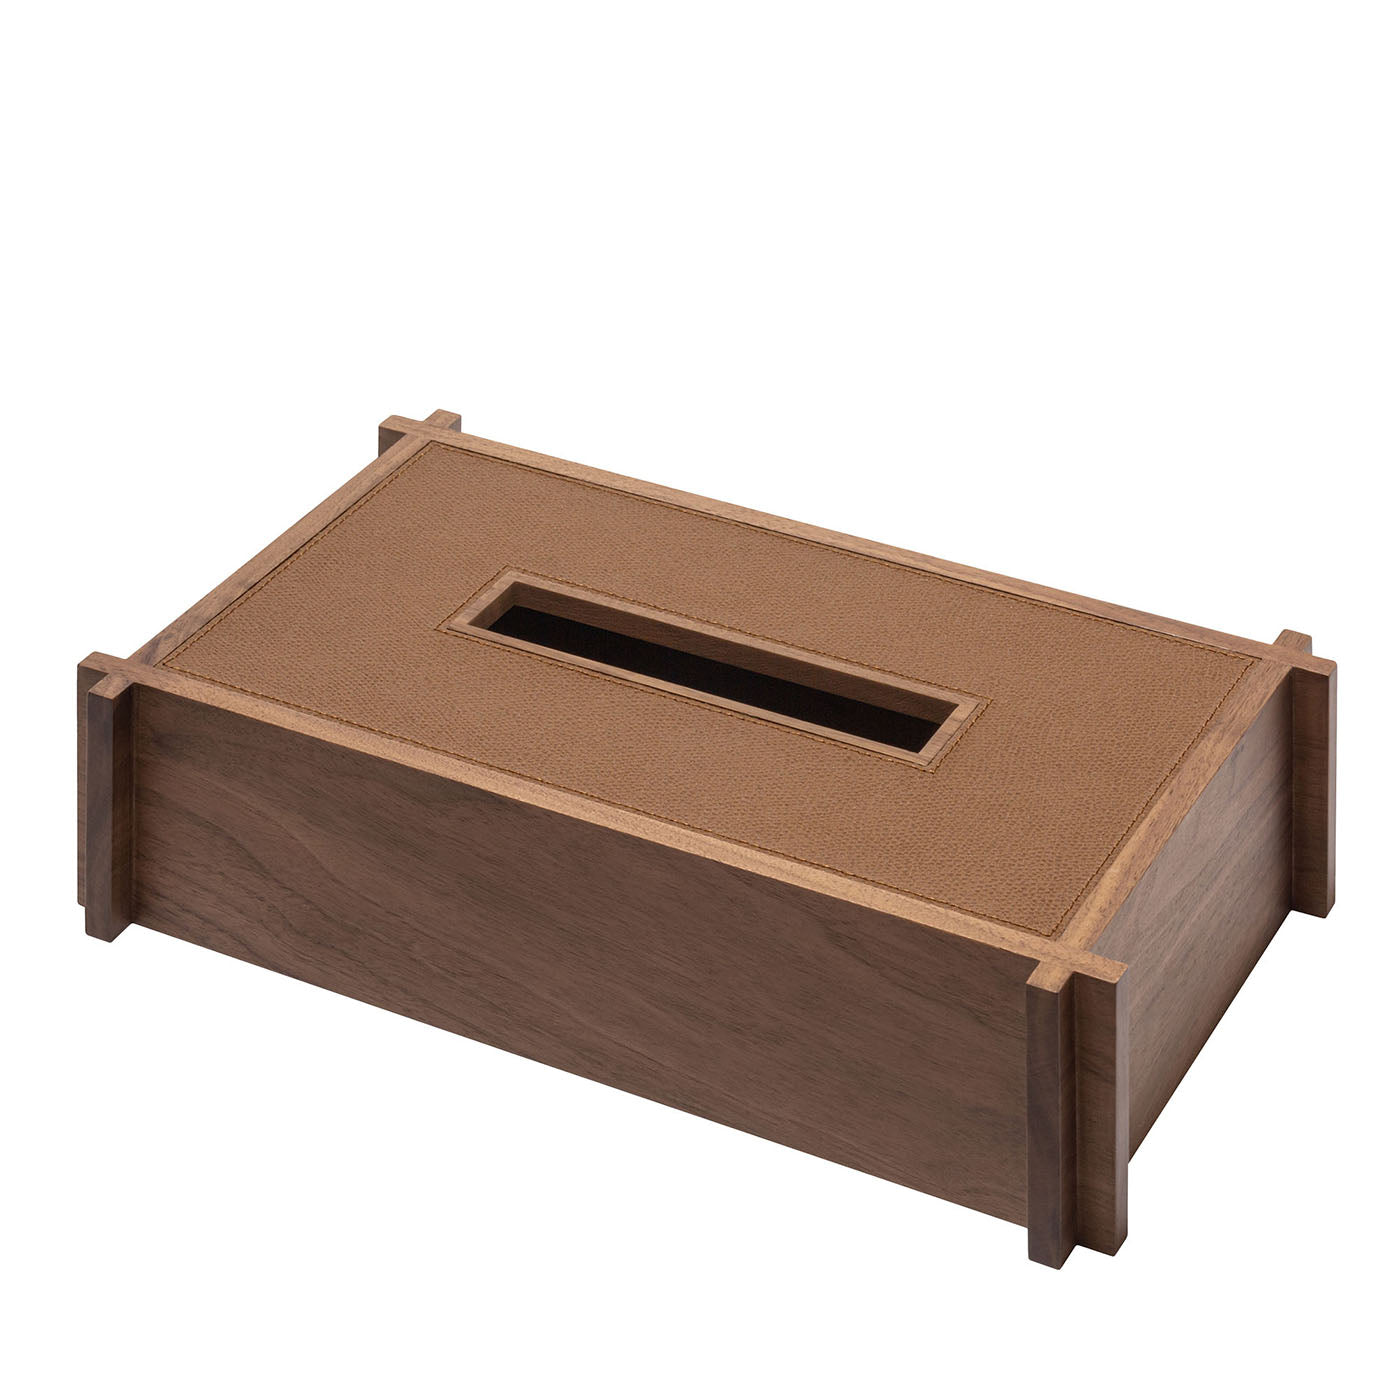 Structura Leather & Wood Brown Rectangular Tissue Holder  - Main view